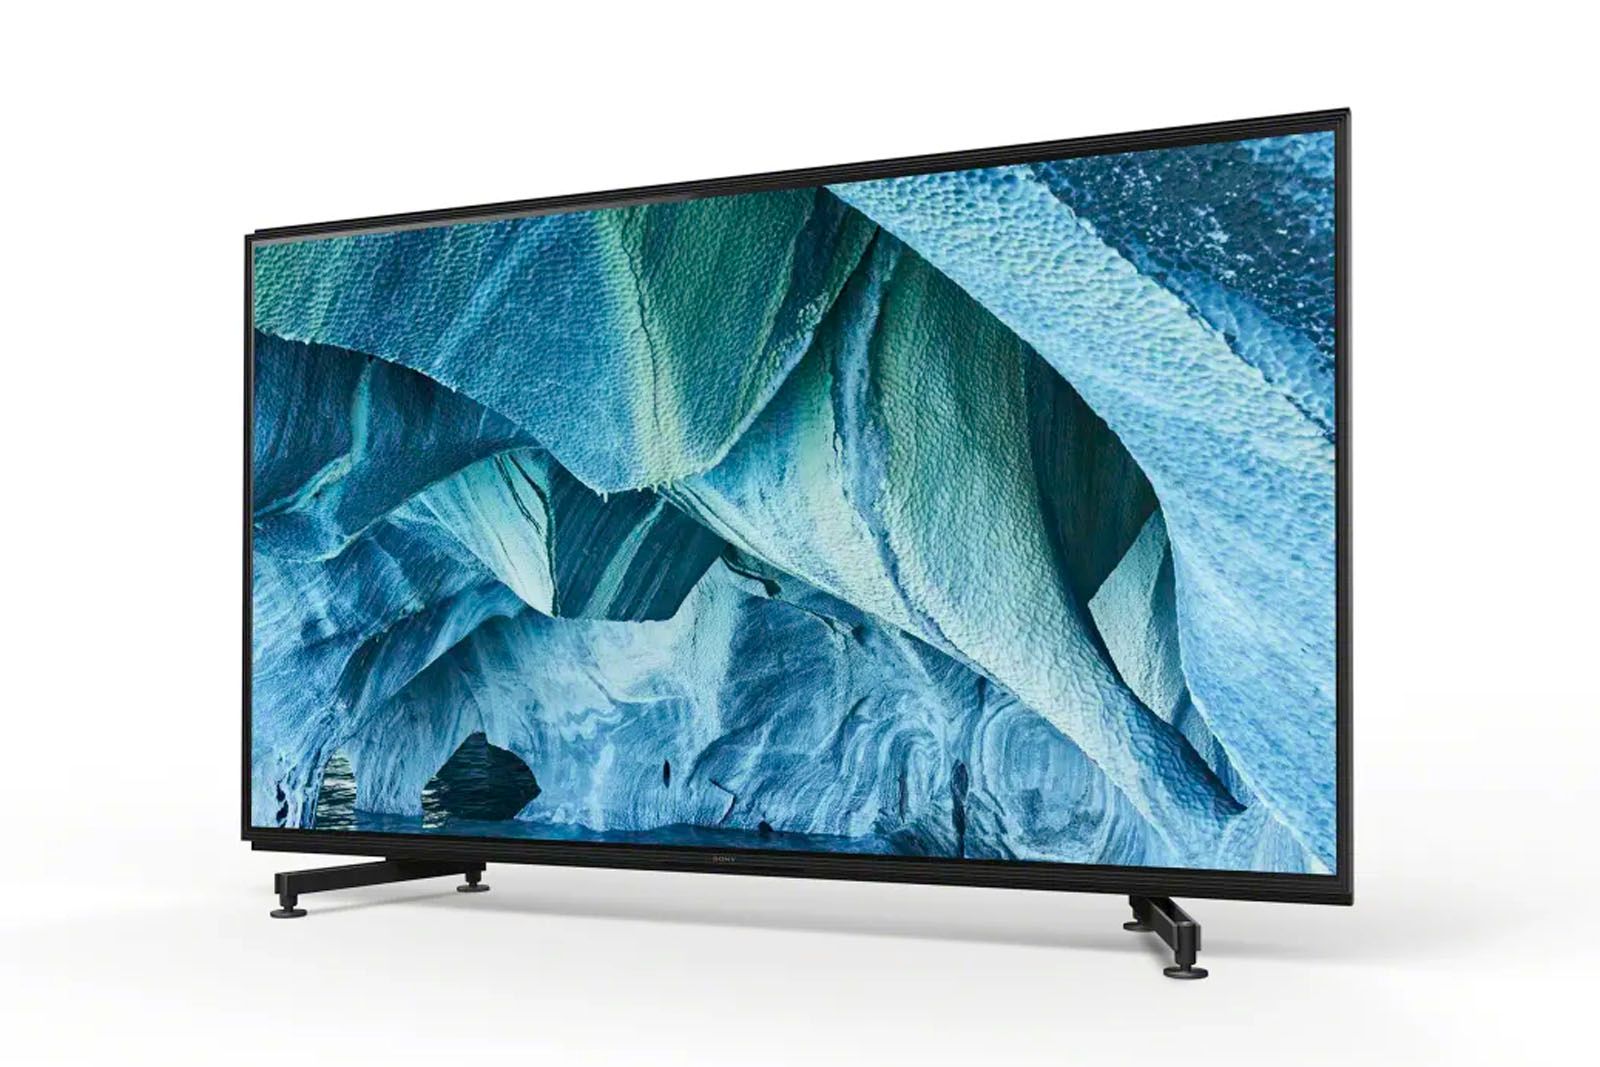 Sonys 98-inch 8K TV is a jaw-dropping 70000 image 1